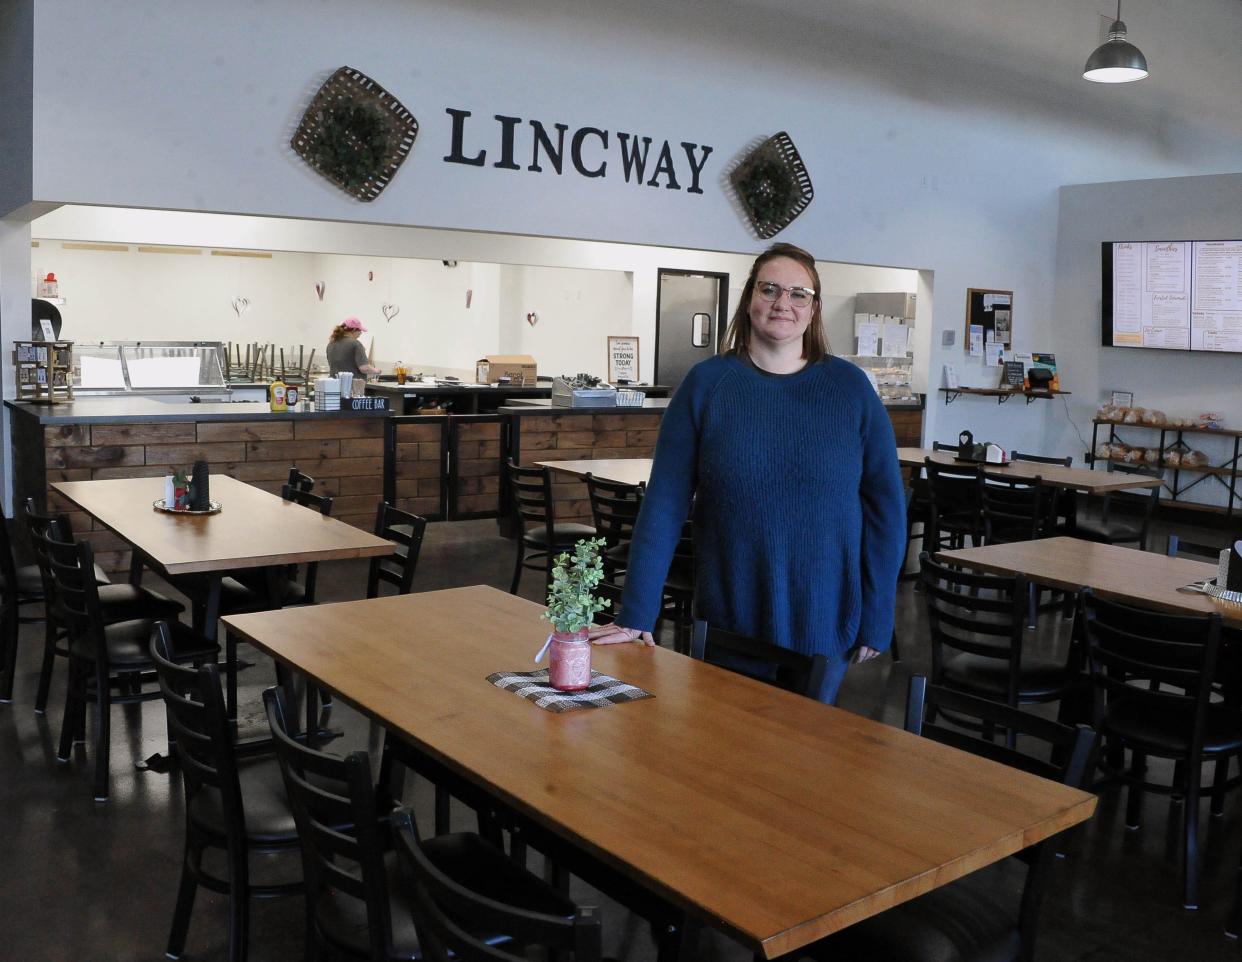 Delight Howells stands in the middle of the LincWay Cafe located in the new playlab near Dalton. It is one of the new businesses along US Route 30.